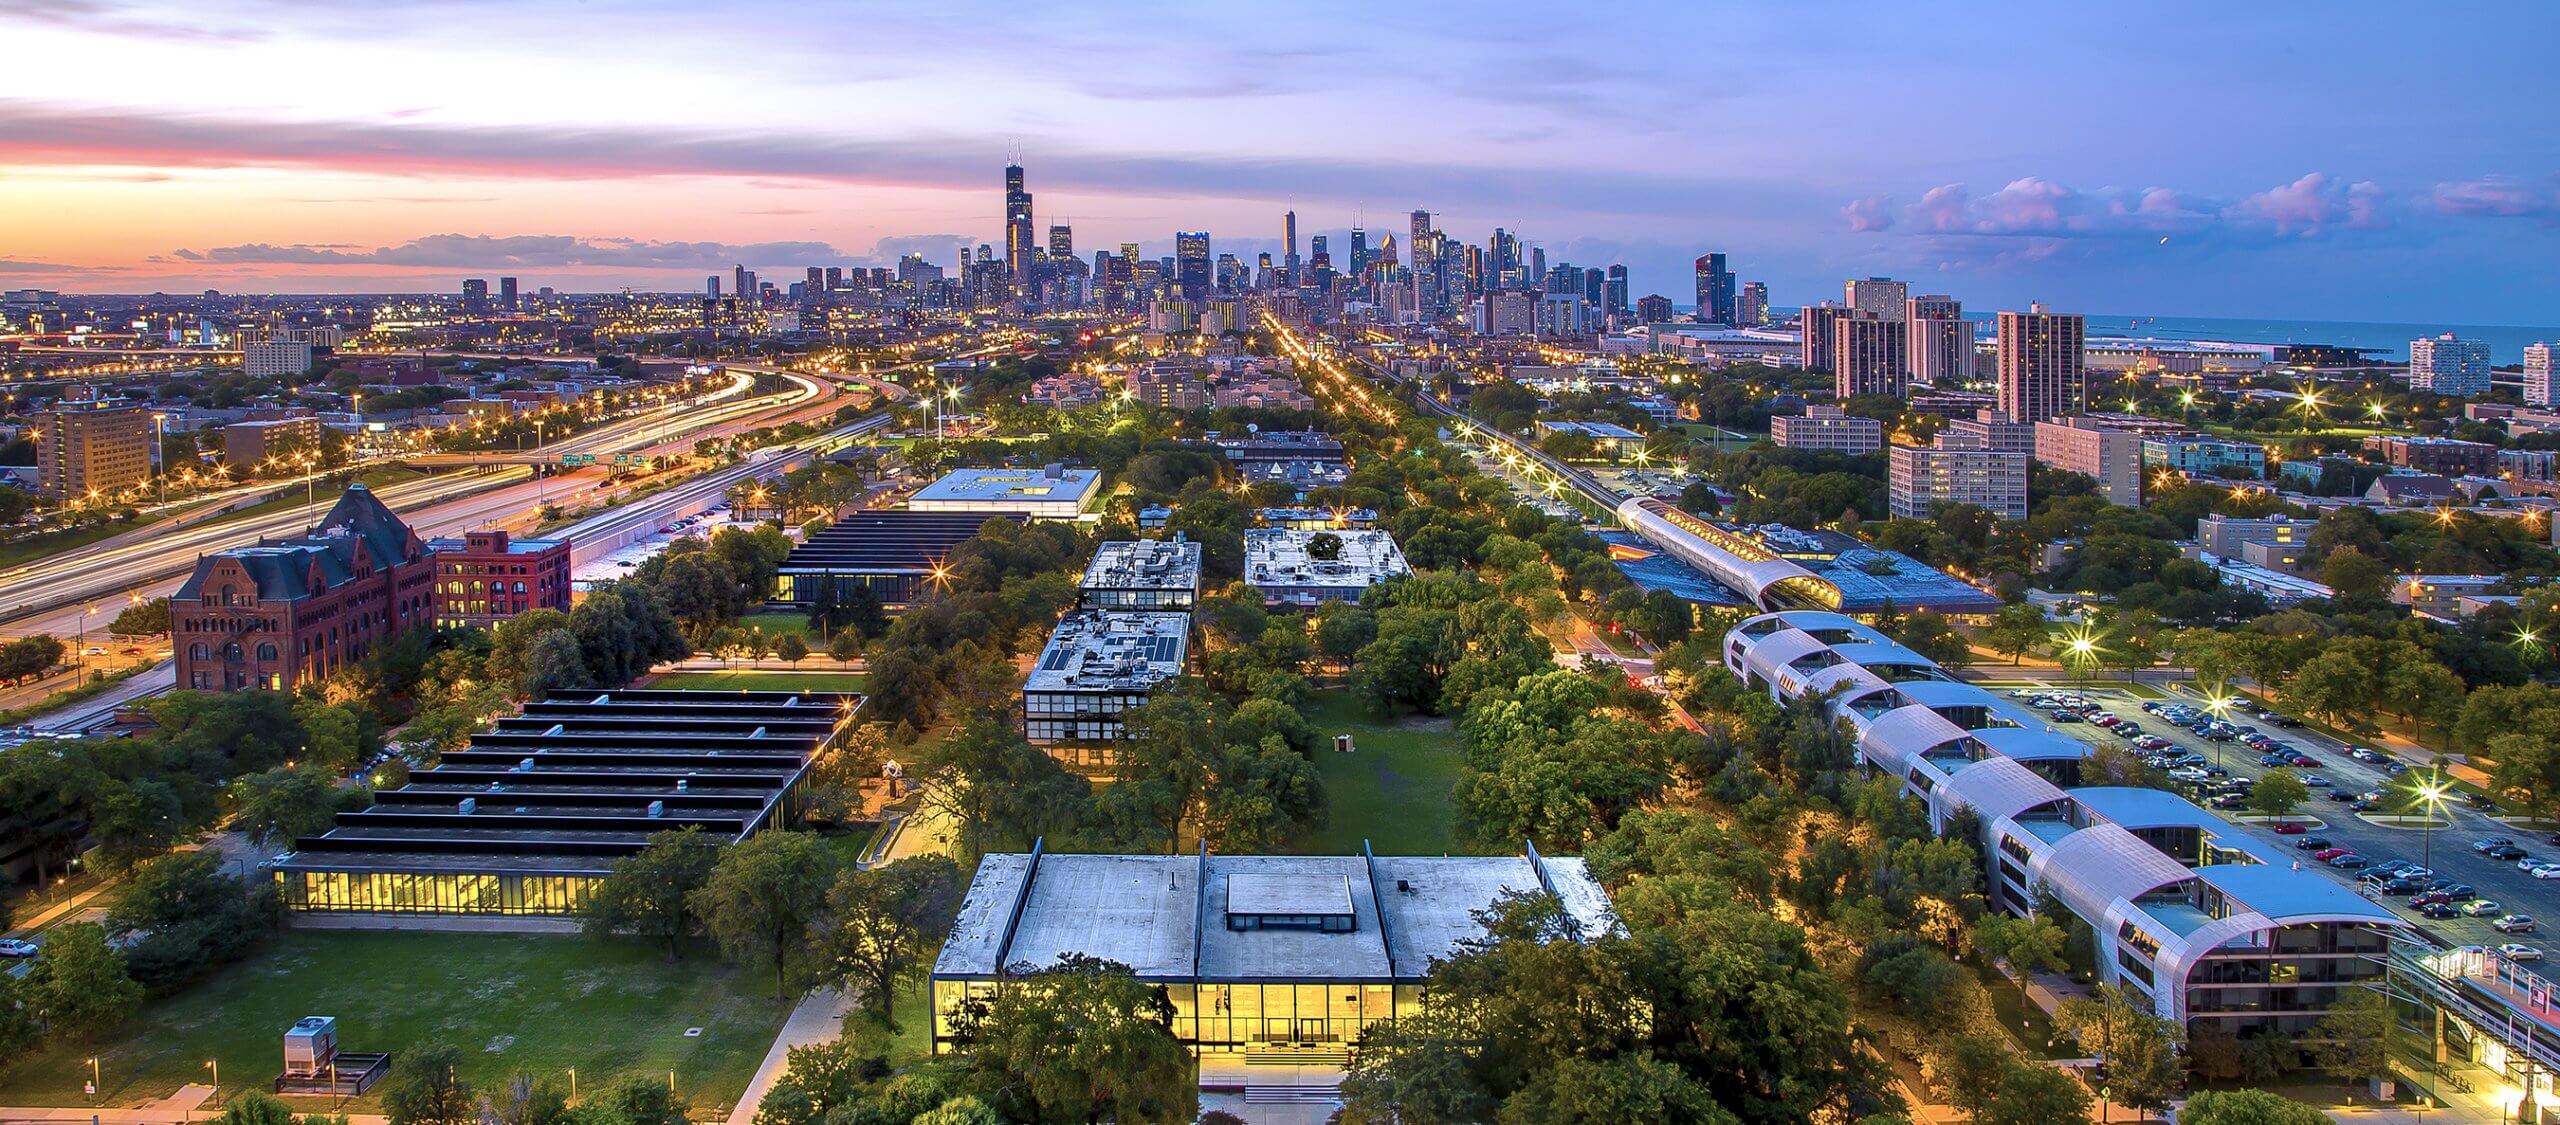 Chicago, Illinois suburb at dawn. Illinois is regarded as one of the best states to live in. 